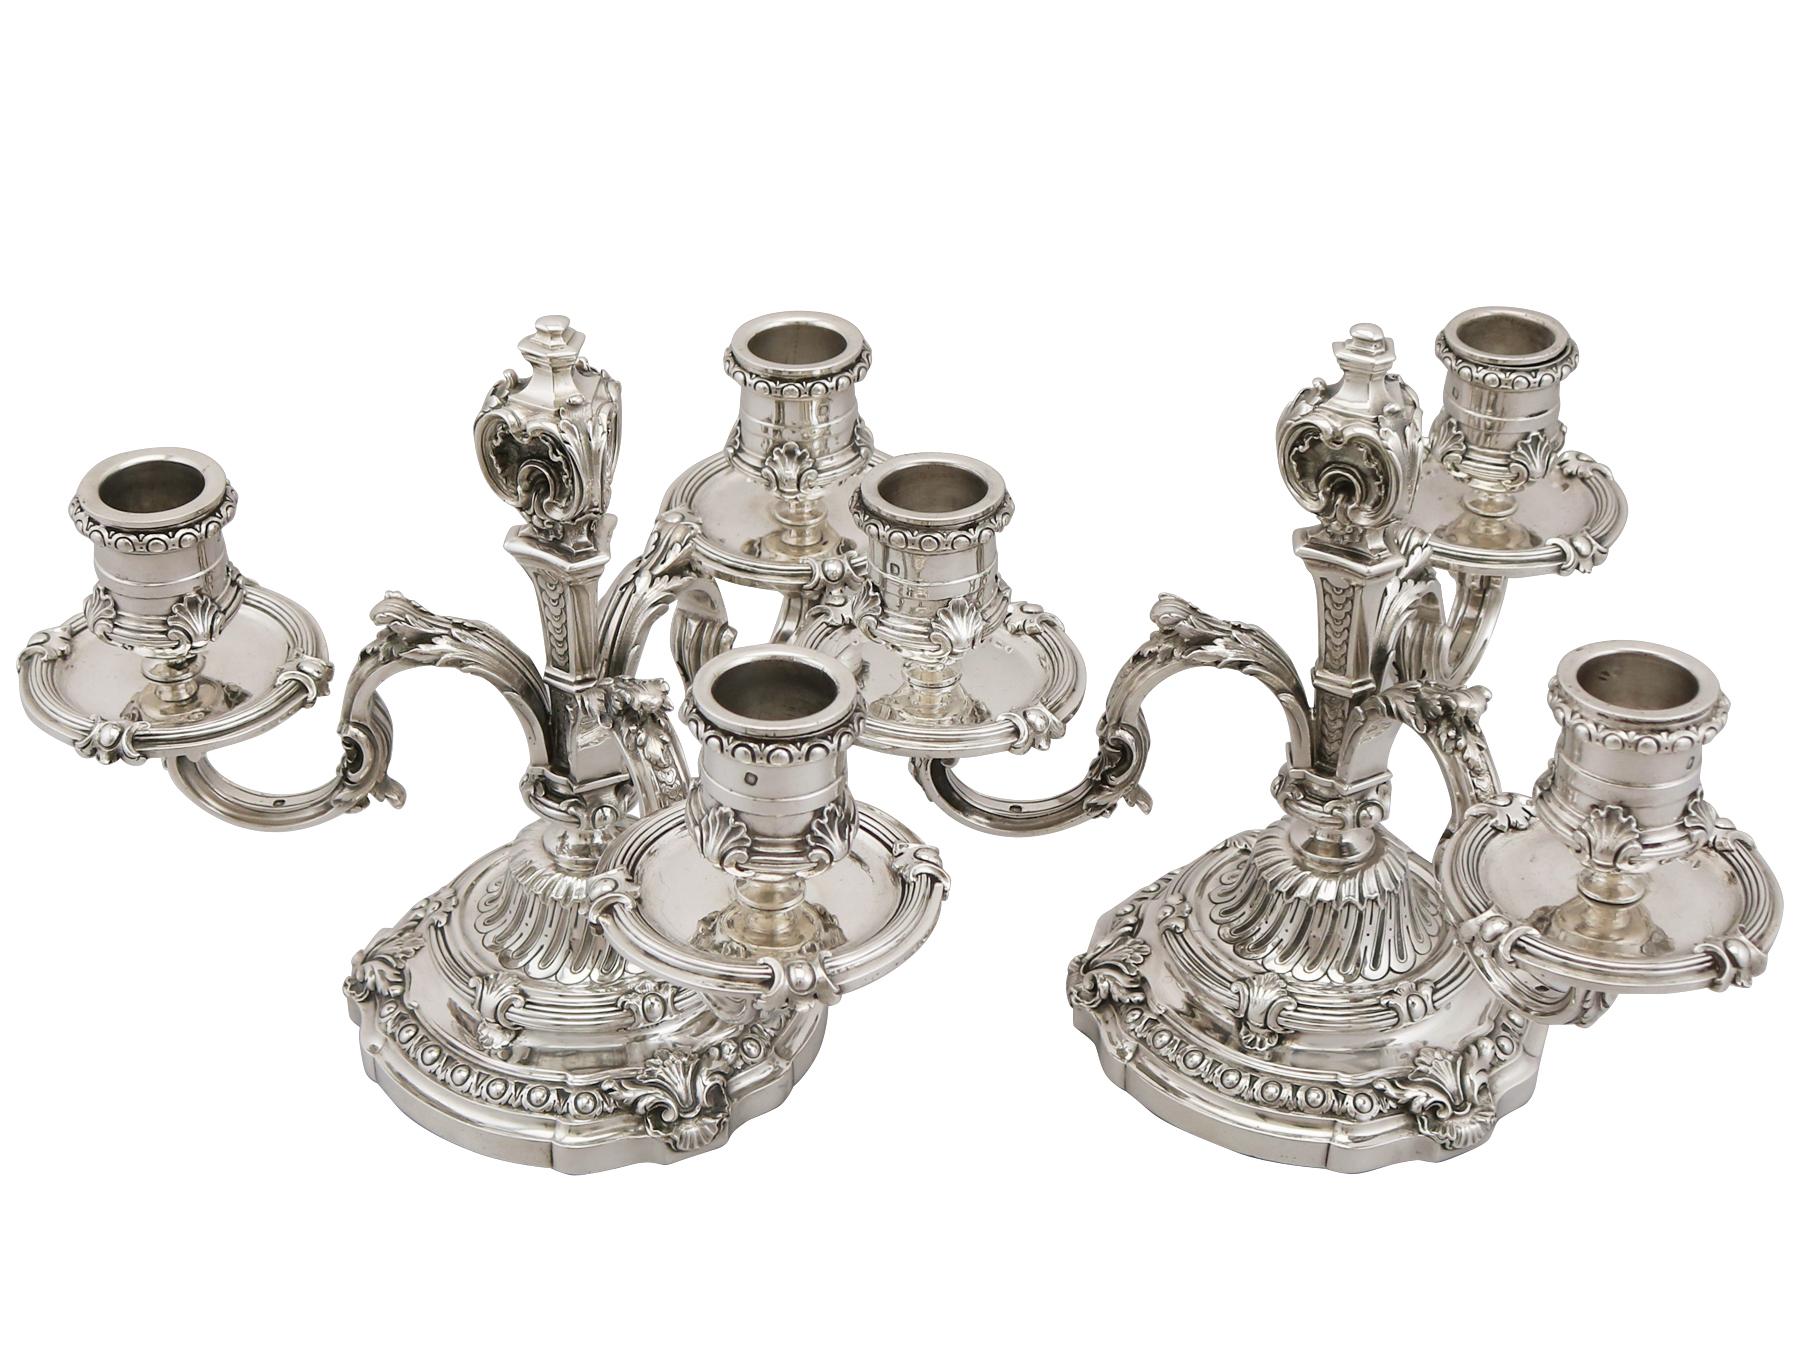 An exceptional, fine and impressive pair of antique French silver three-arm candelabra; an addition to our ornamental silverware collection.

These exceptional antique French silver candelabra have a plain circular form, reflecting the Louis XV